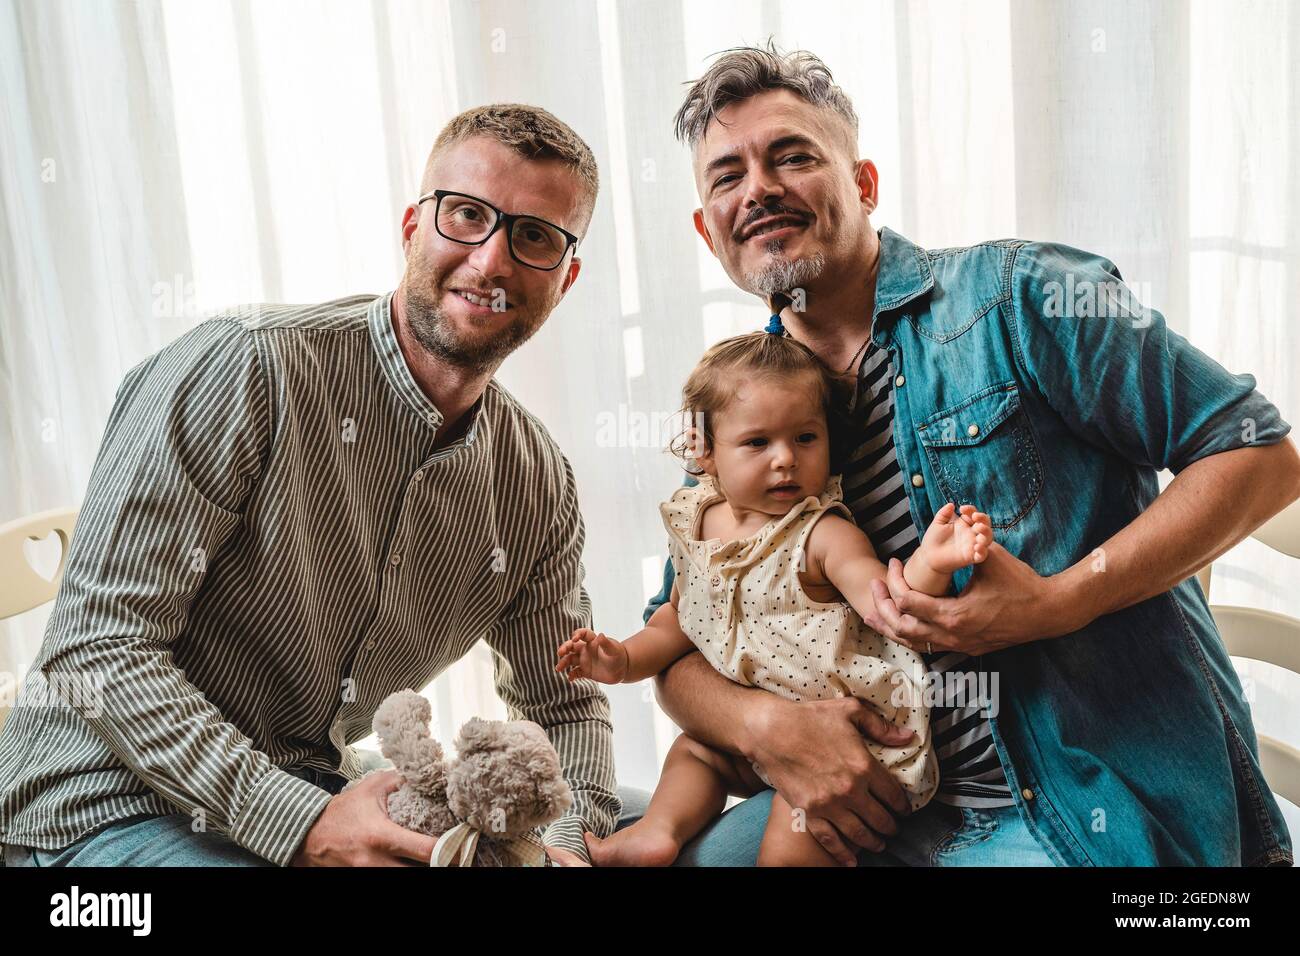 Portrait of happy LGBTQ family at home - Gay couple and their daughter - Diversity concept and LGBTQ family relationship Stock Photo